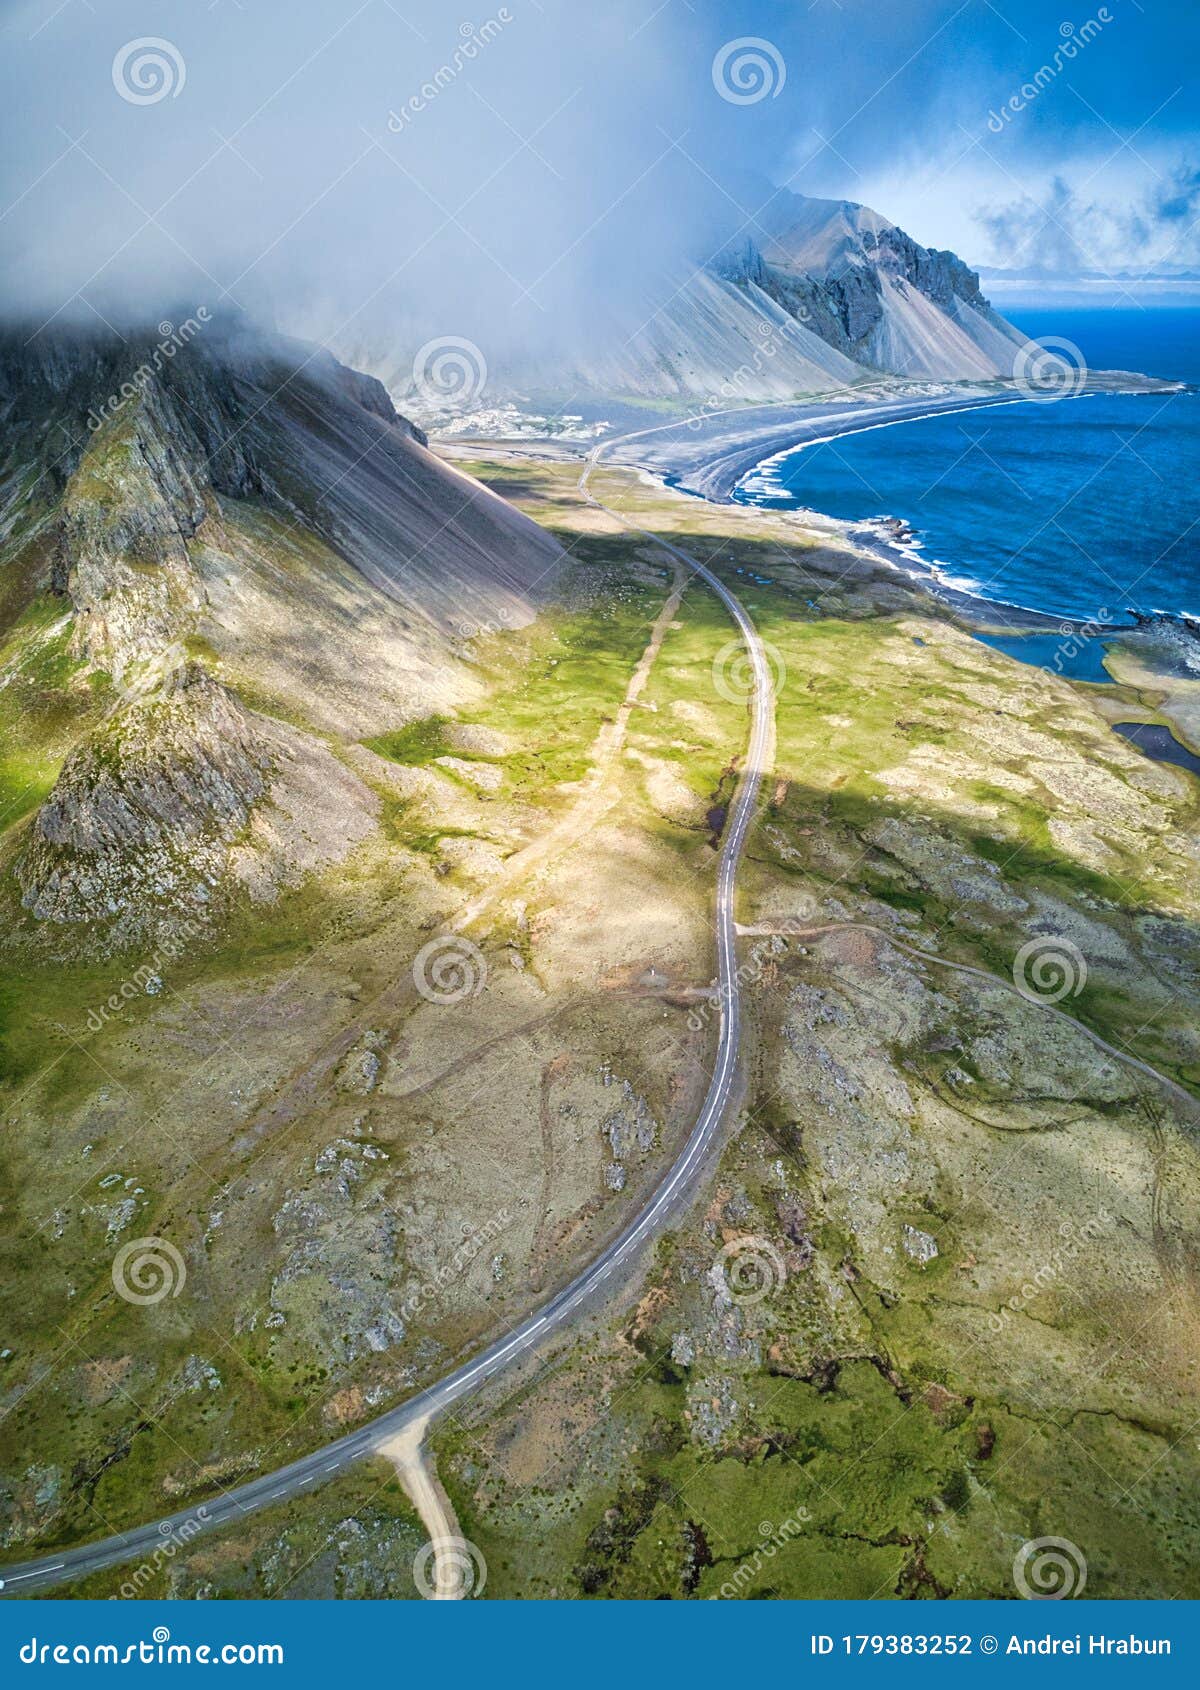 Car Driving on Beautiful Road, Travel Background, Aerial Scenic ...